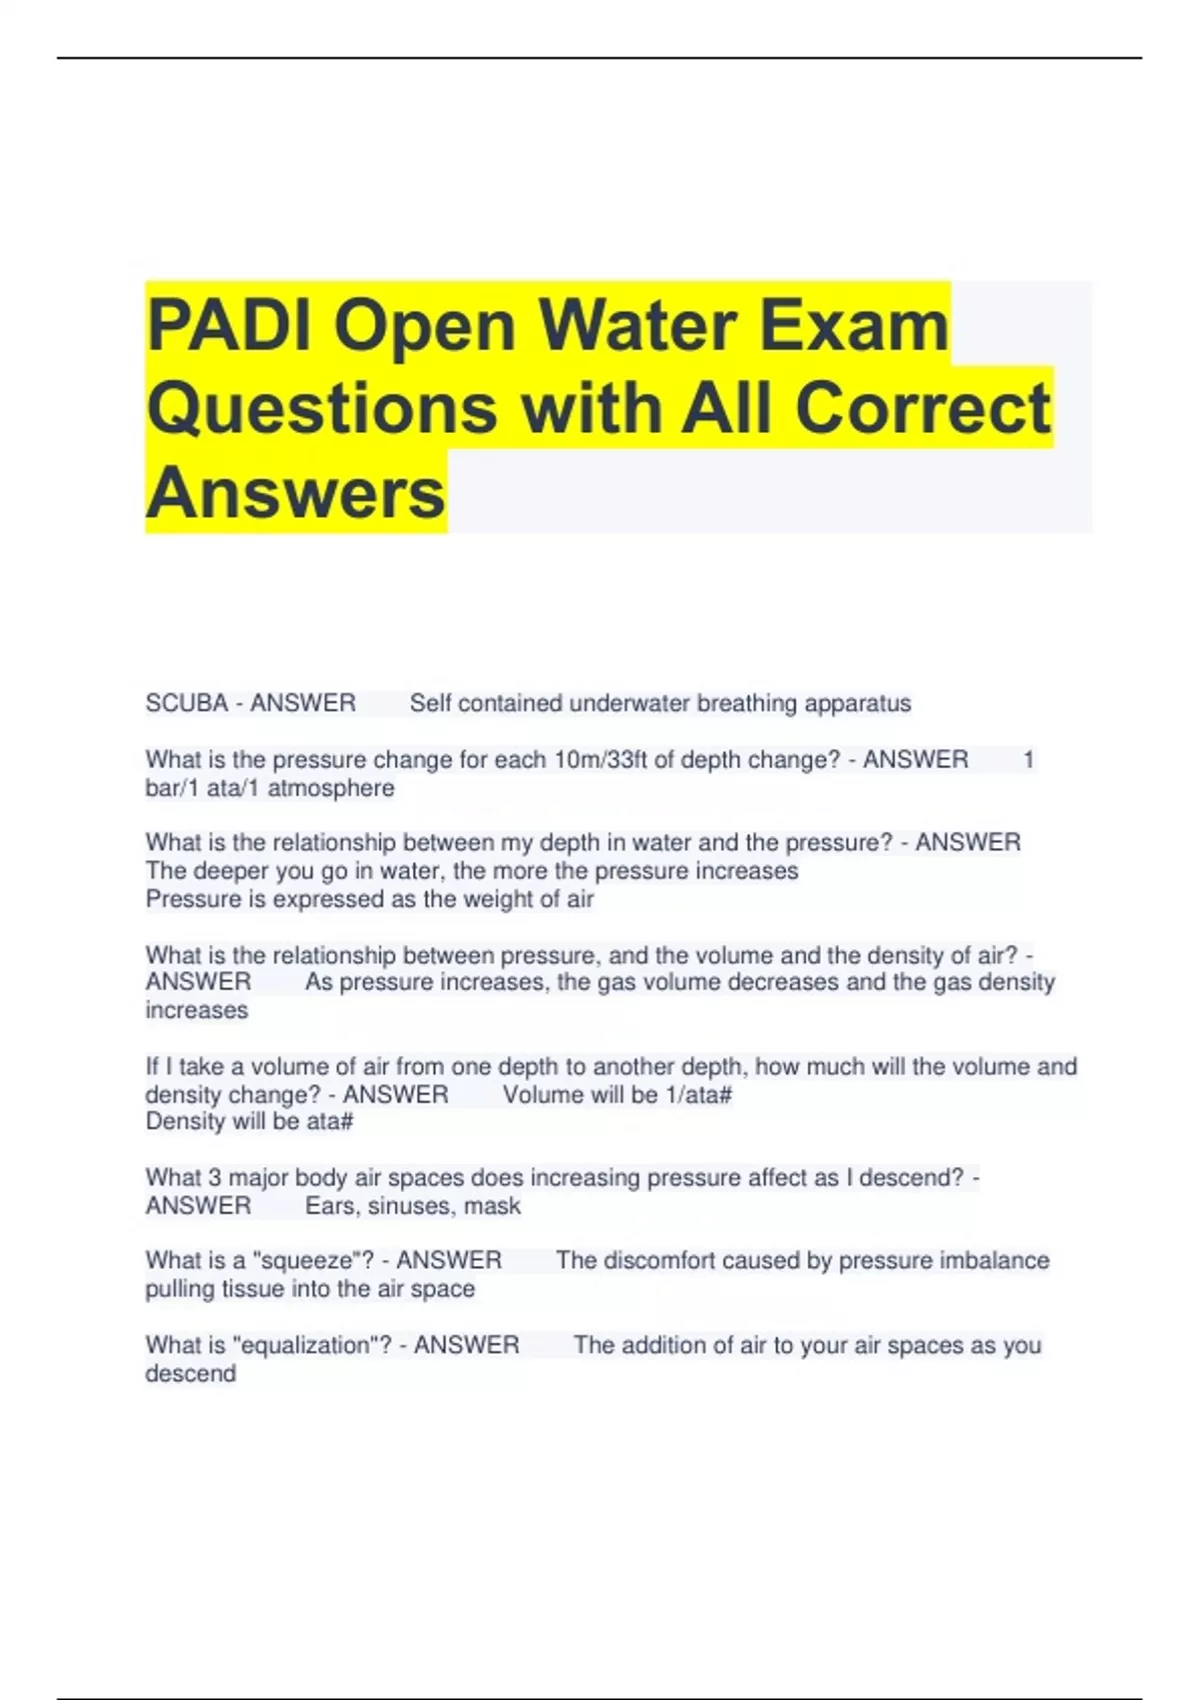 PADI Open Water 2023 Exam Questions with All Correct Answers - PADI Open Water